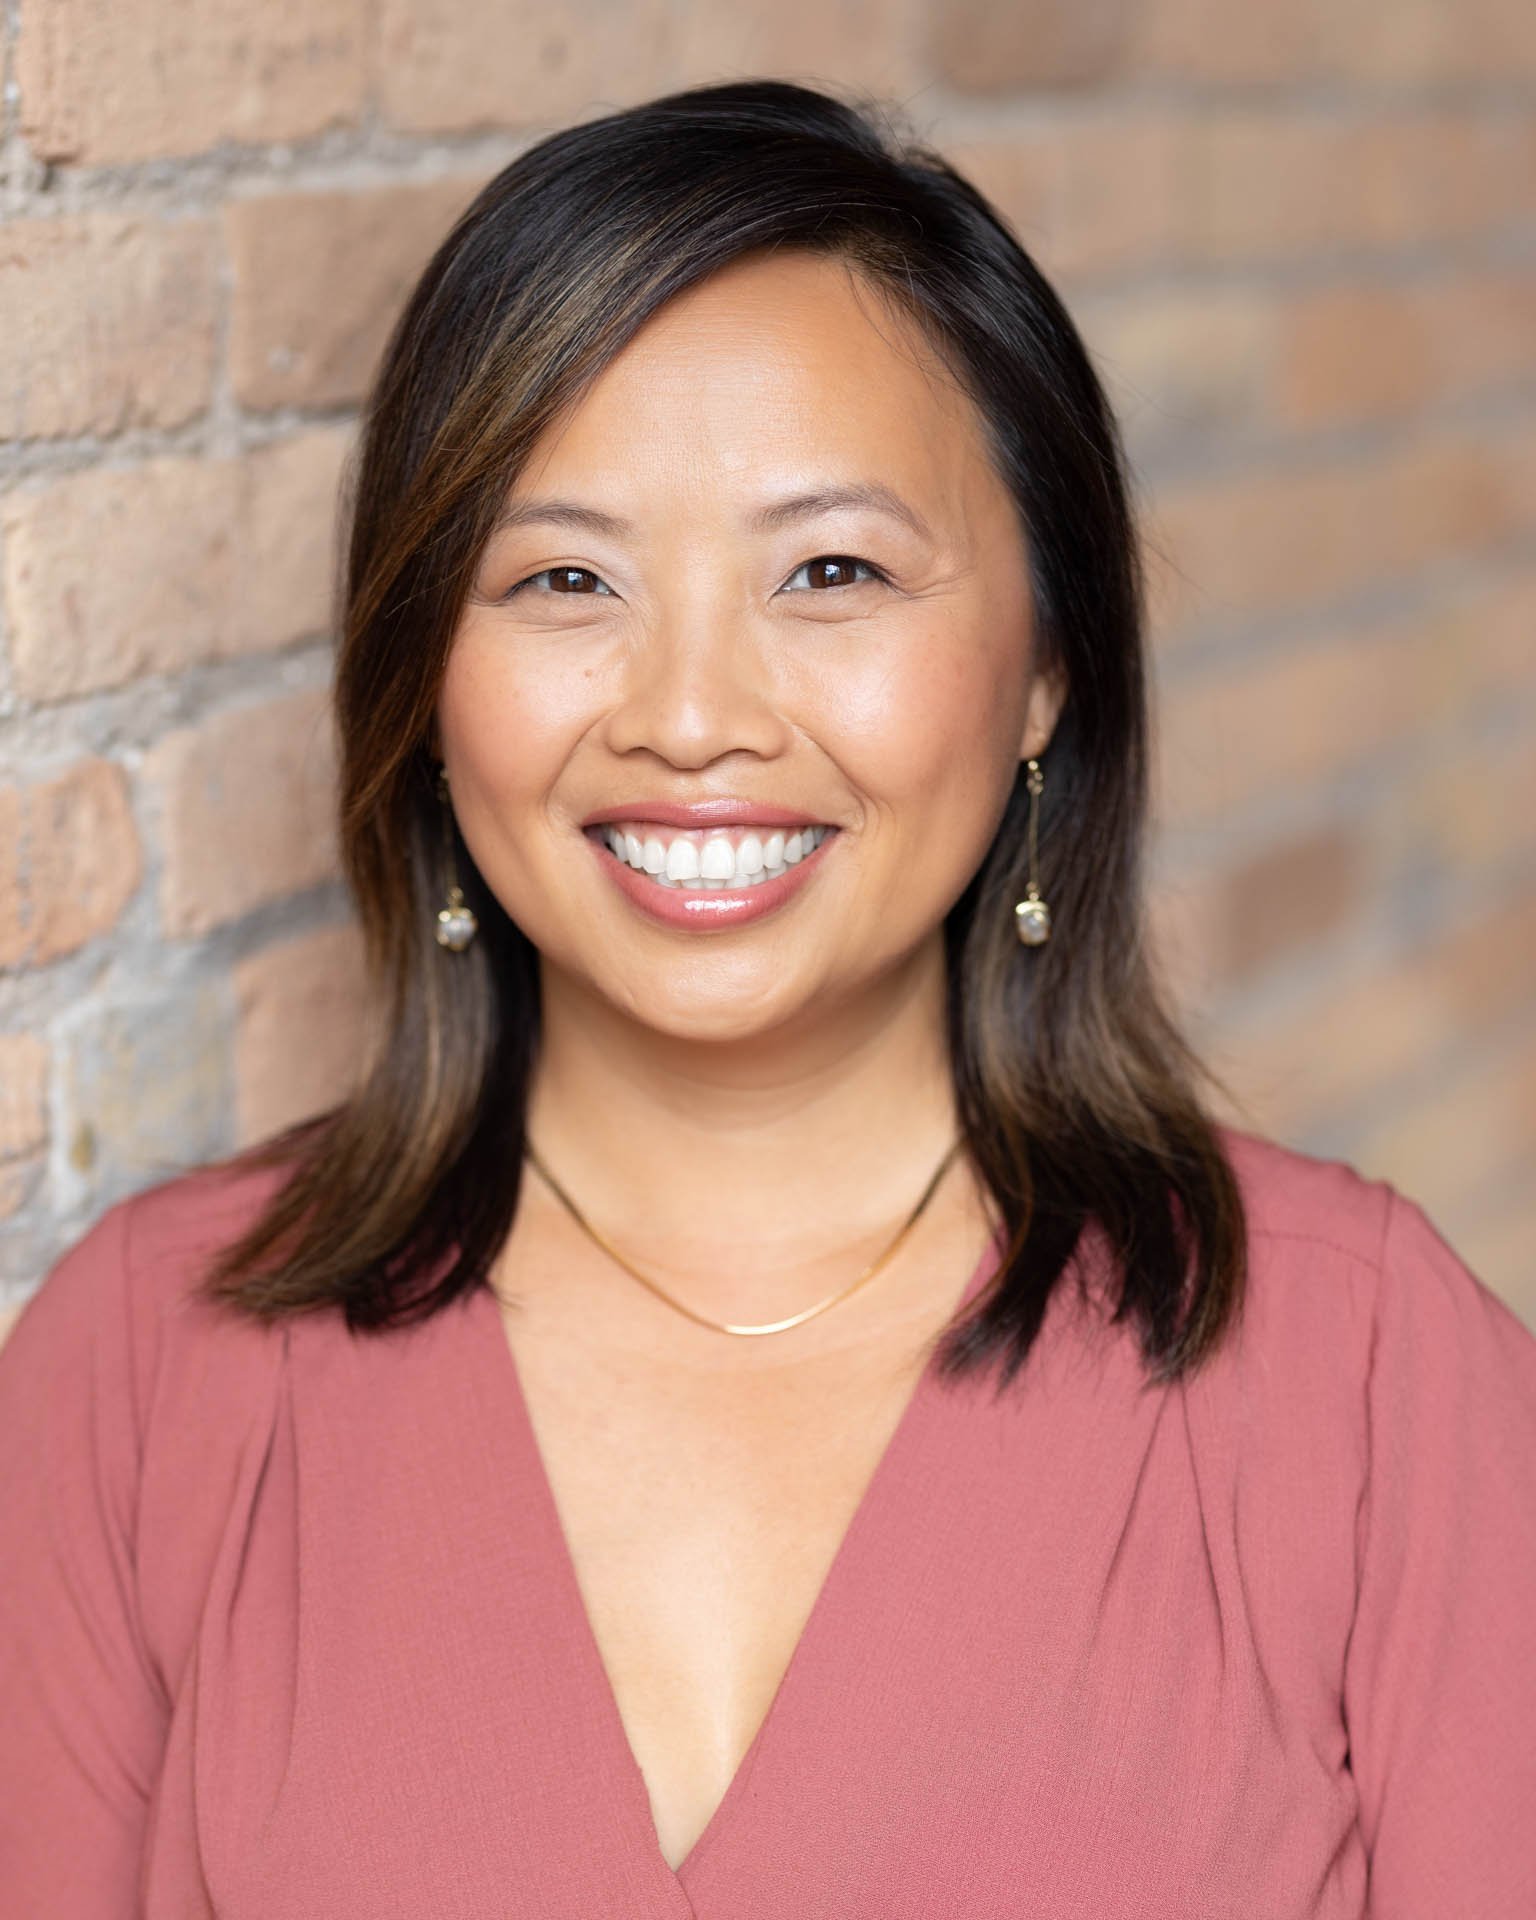 Professional headshot of young and vibrant Asian woman smiling